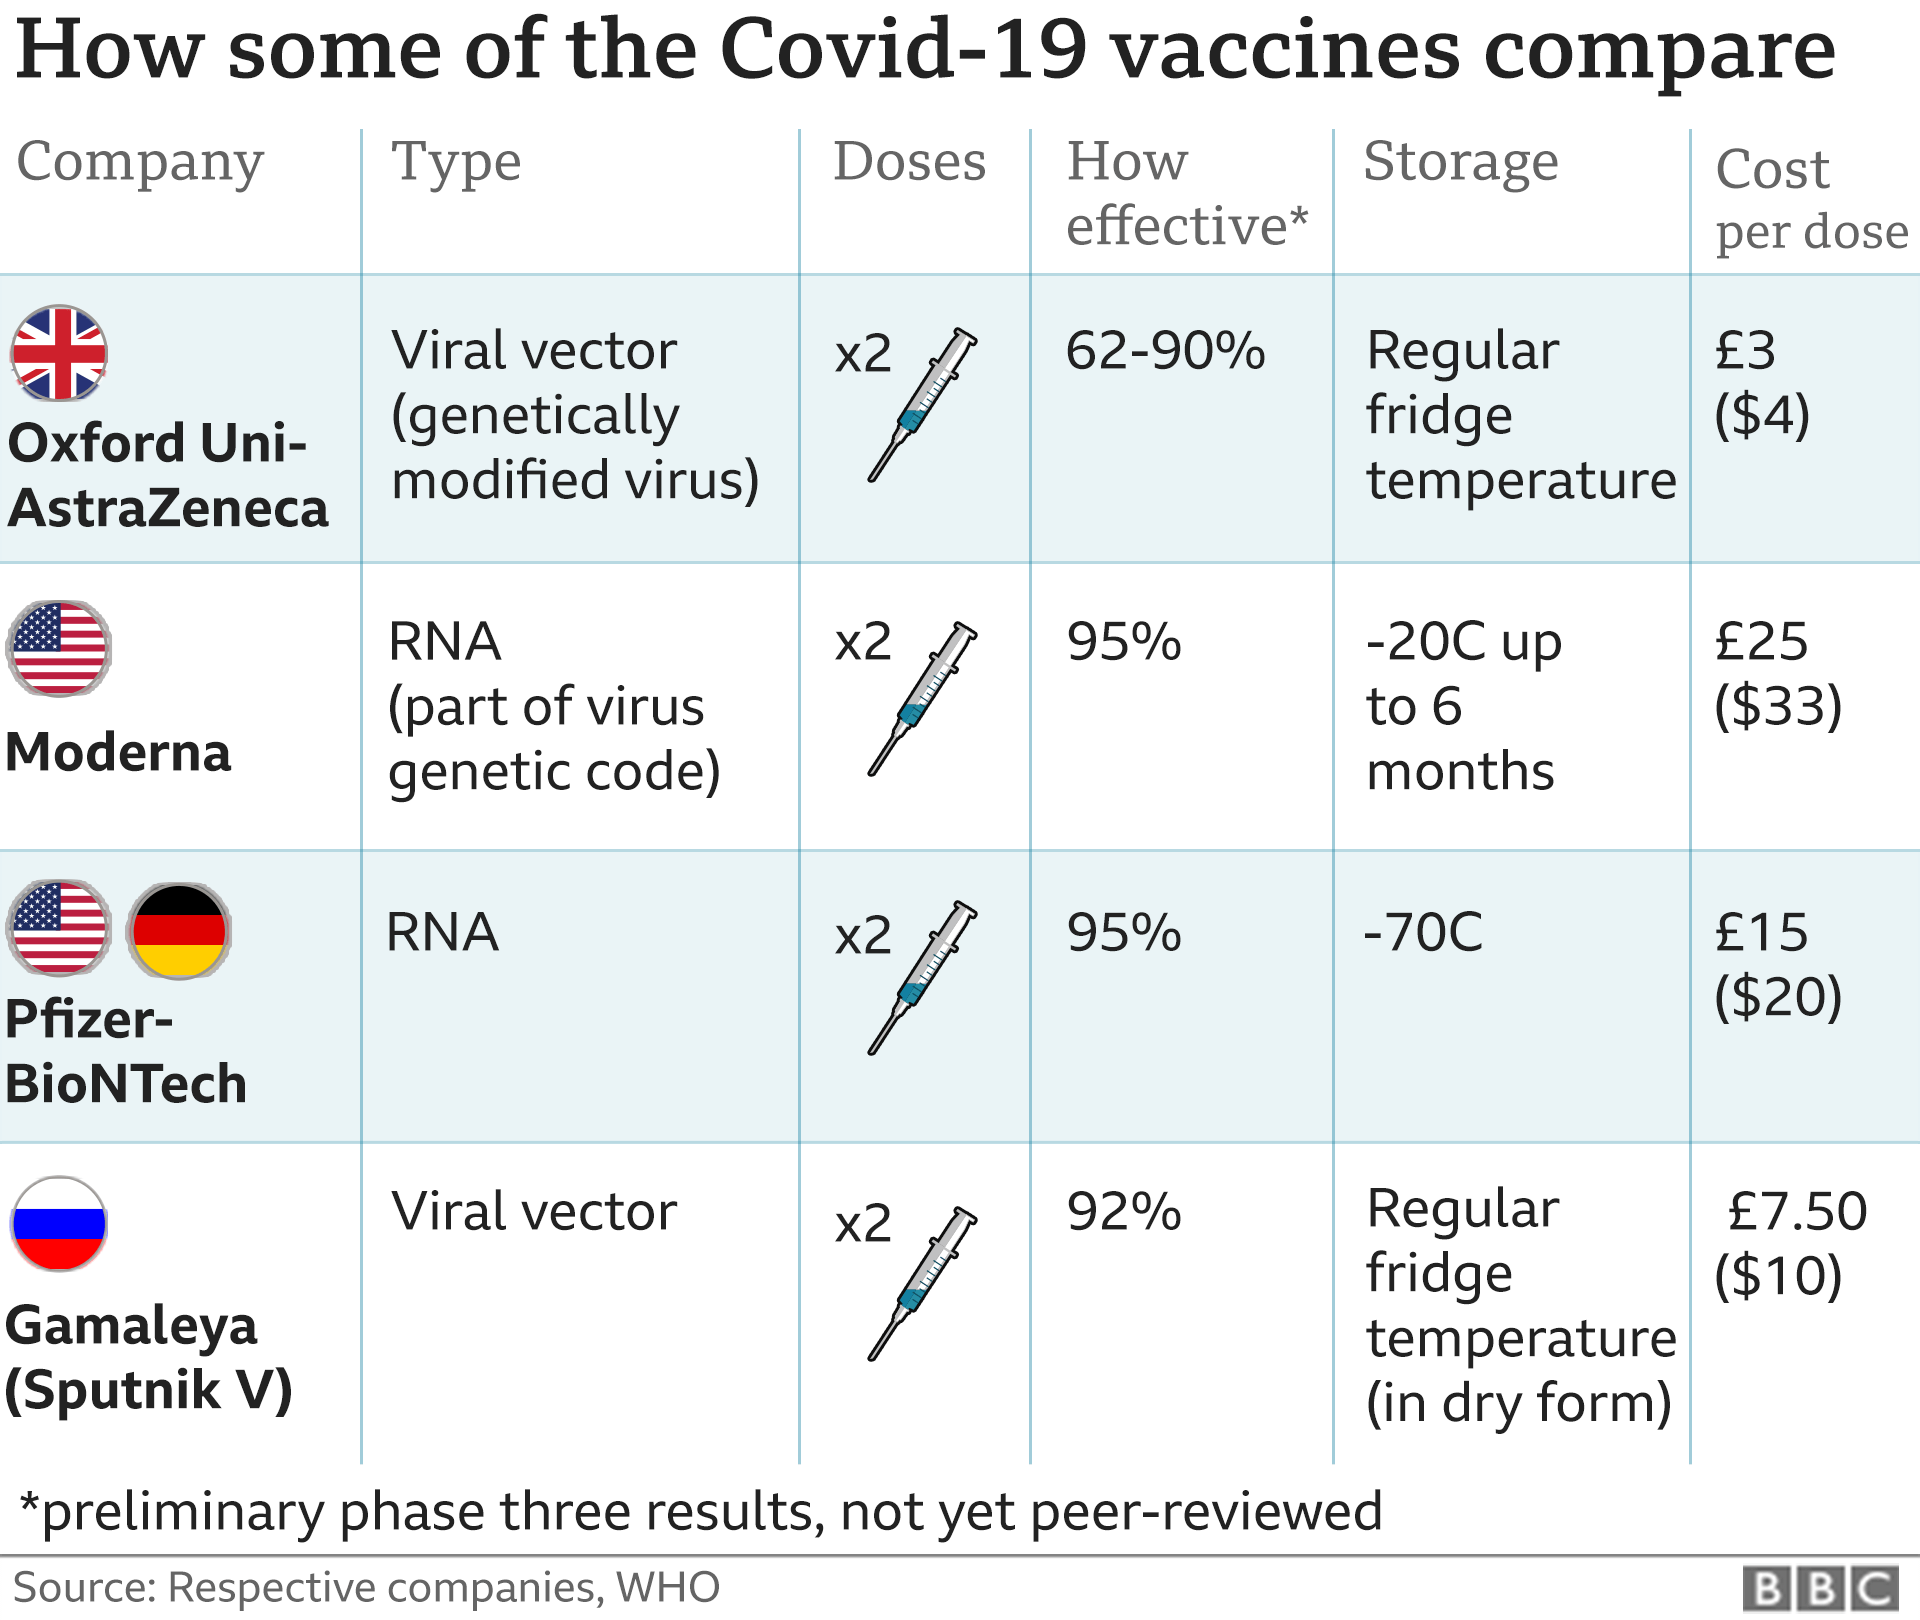 https://ichef.bbci.co.uk/news/976/cpsprodpb/10BAA/production/_115722586_more_vaccines_compared_v6-nc.png